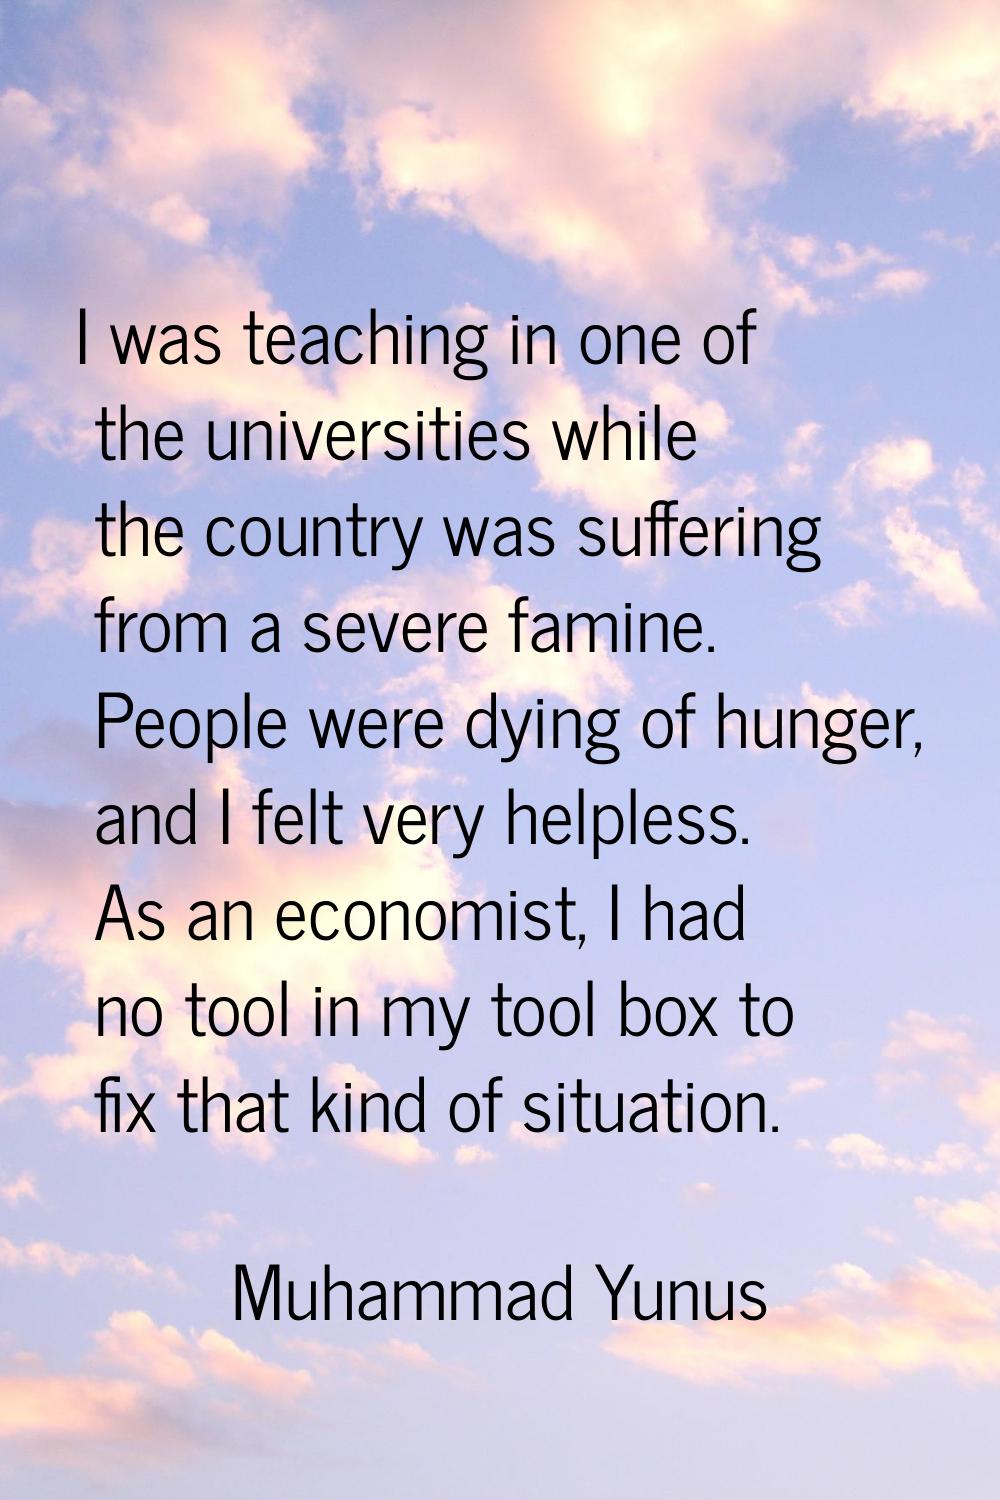 I was teaching in one of the universities while the country was suffering from a severe famine. Peo